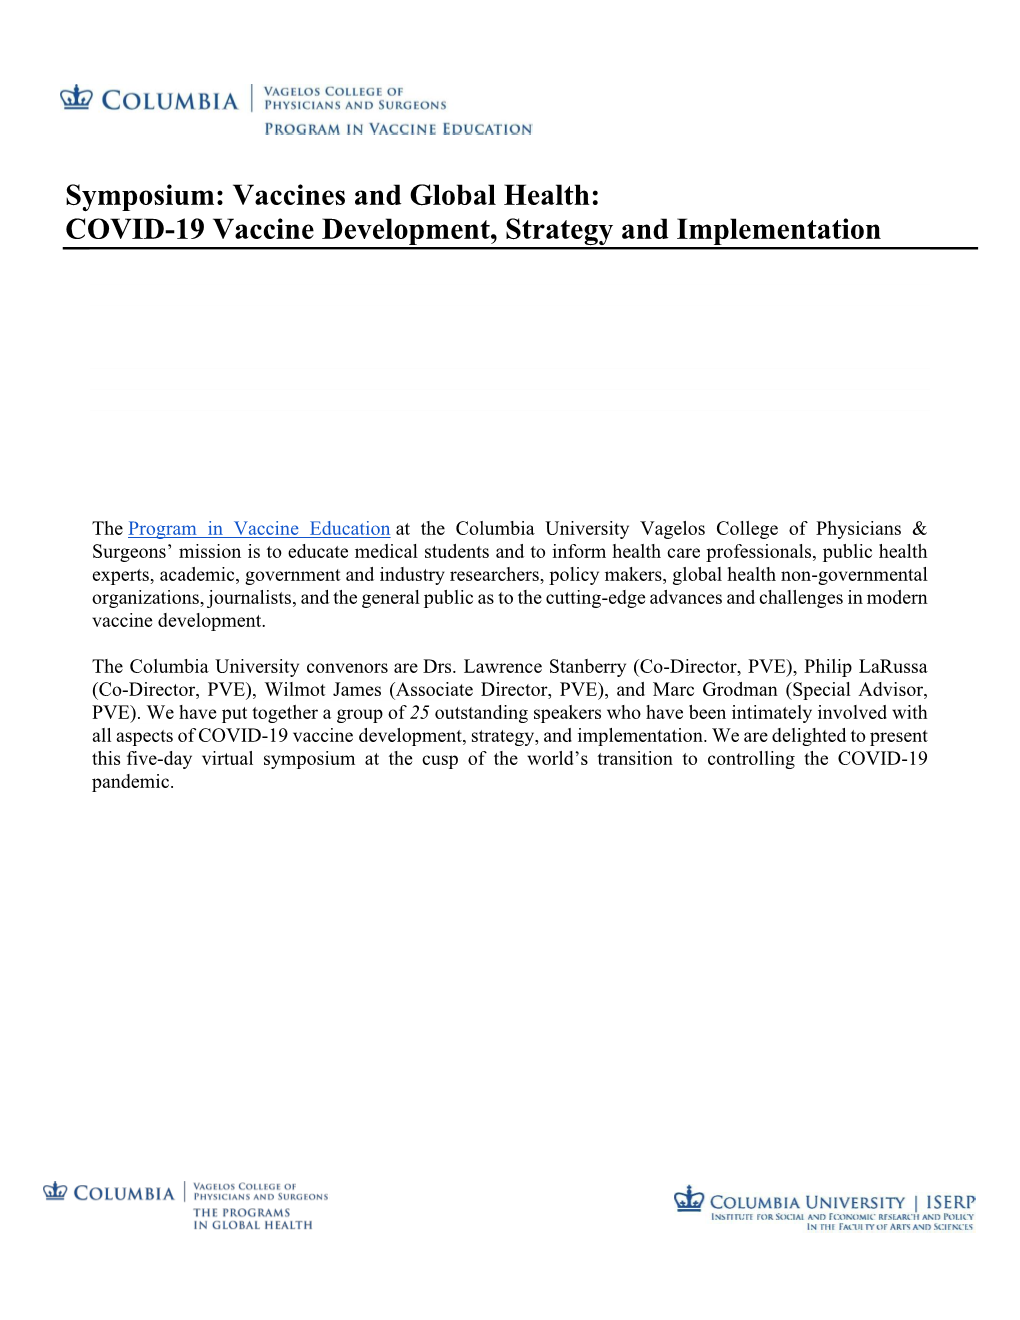 Symposium: Vaccines and Global Health: COVID-19 Vaccine Development, Strategy and Implementation